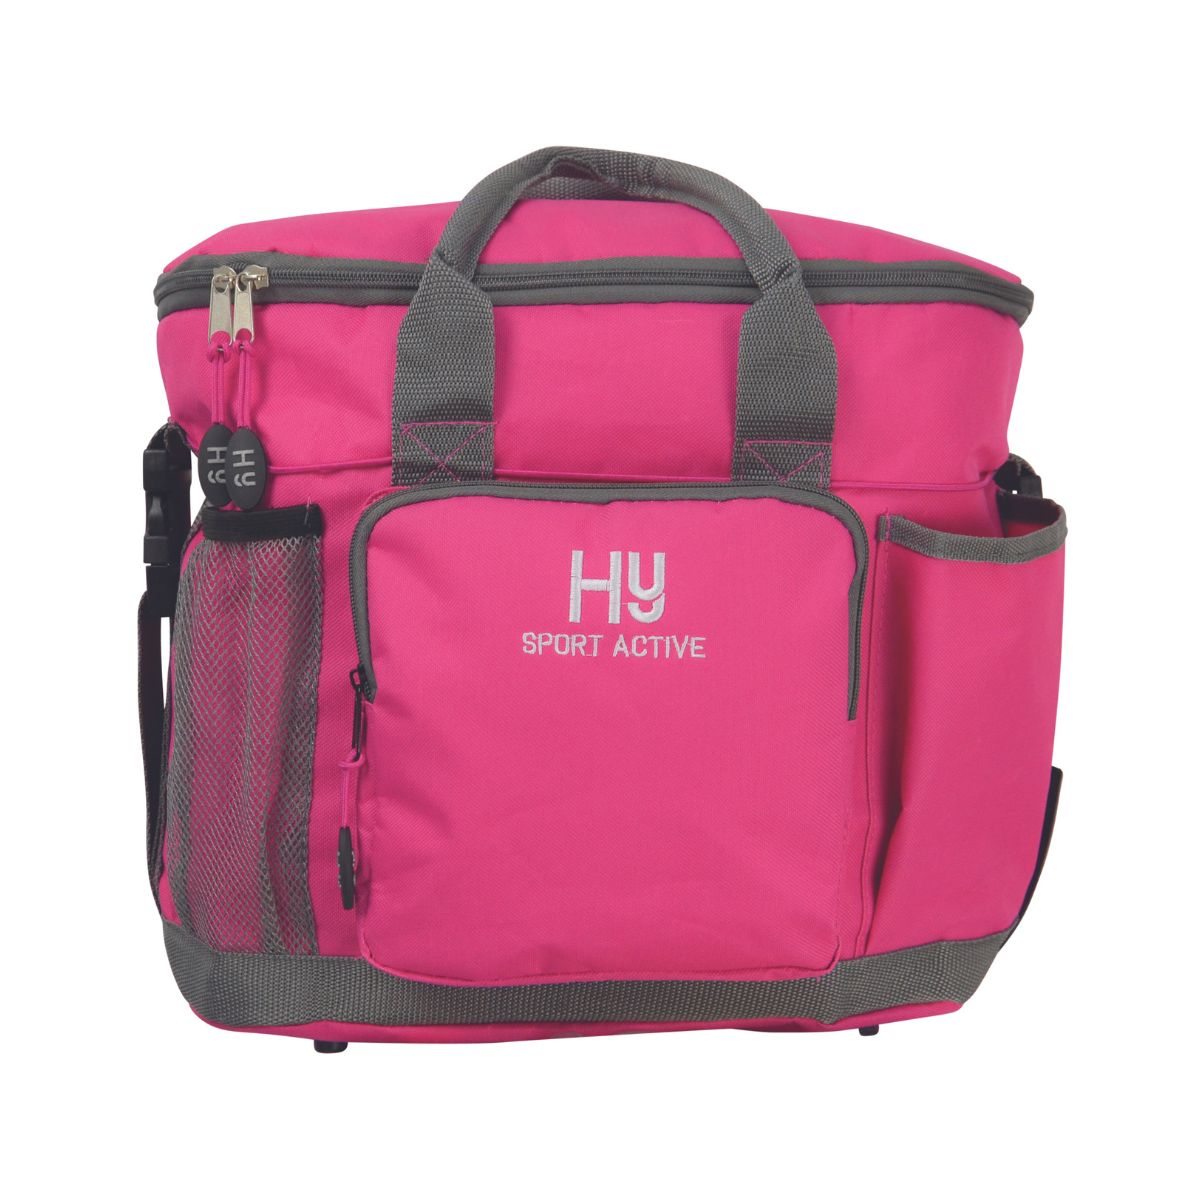 Hy Sport Active Grooming Bag Reduced